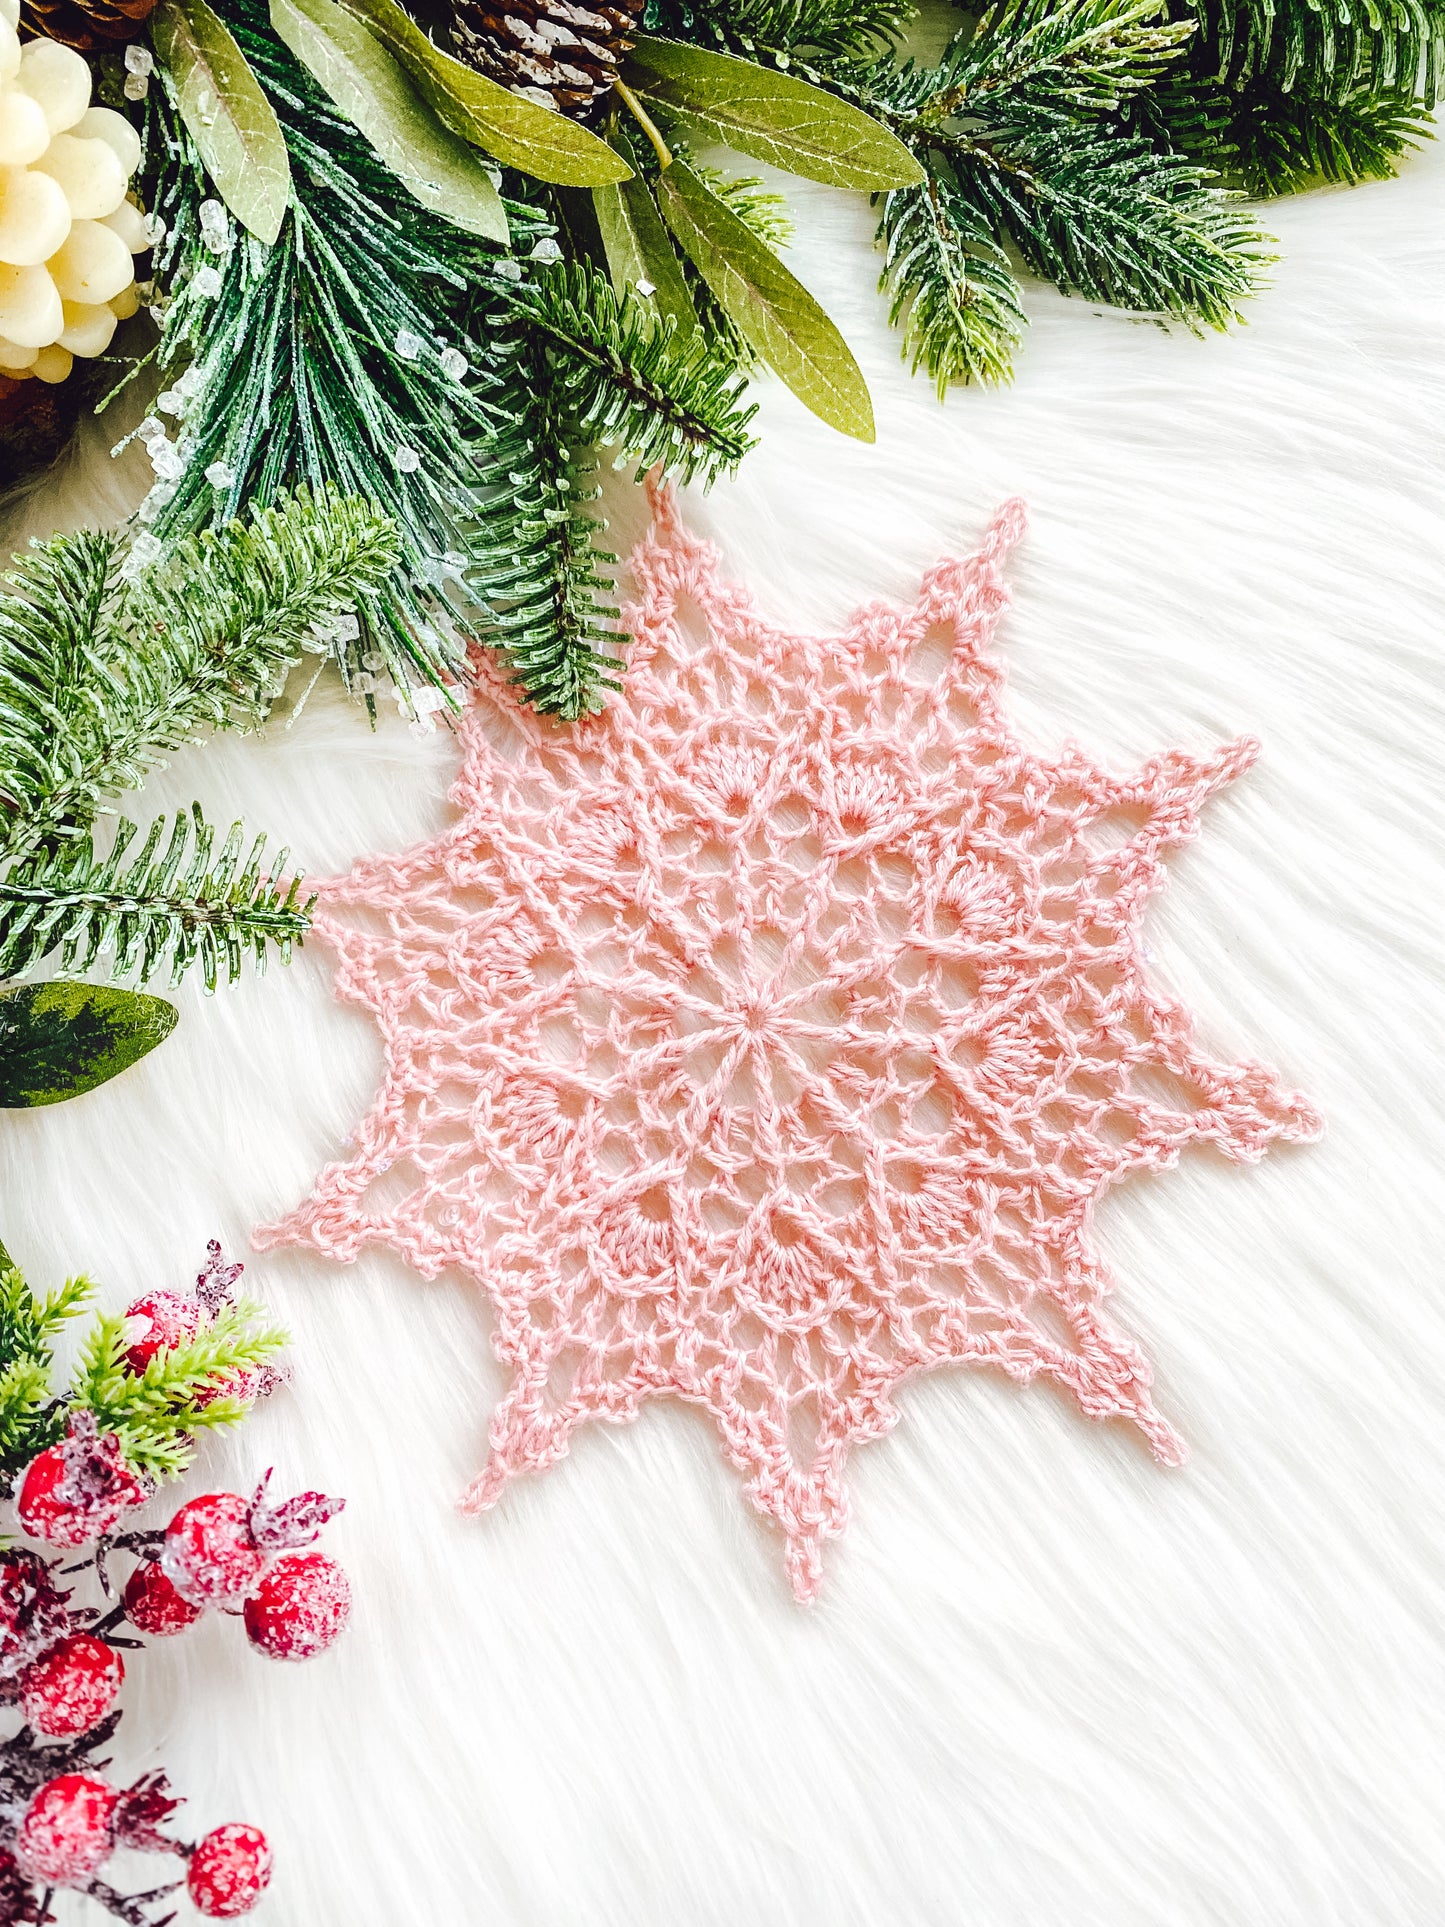 Crocheted Lace Snowflakes